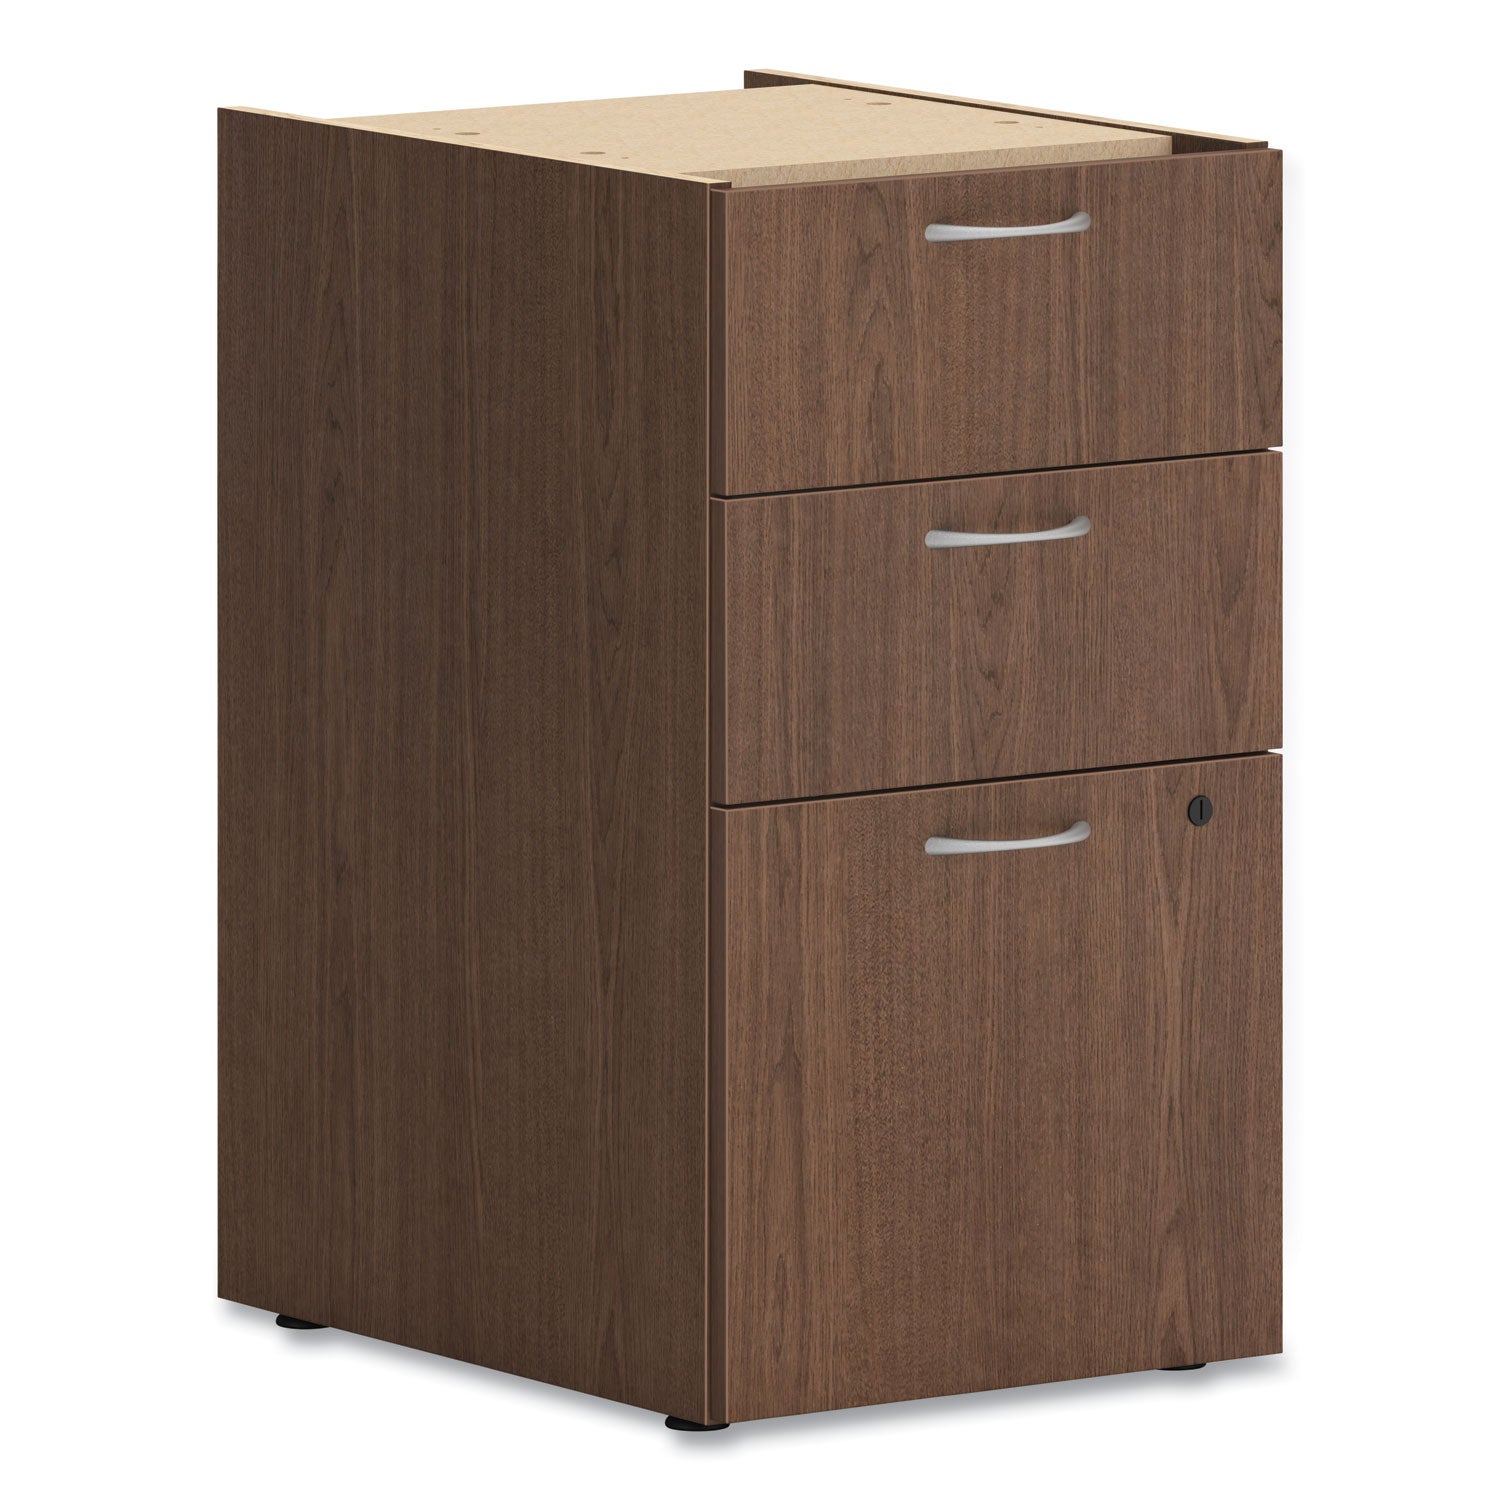 mod-support-pedestal-left-or-right-3-drawers-box-box-file-legal-letter-sepia-walnut-15-x-20-x-28_honplpsbbfle1 - 1